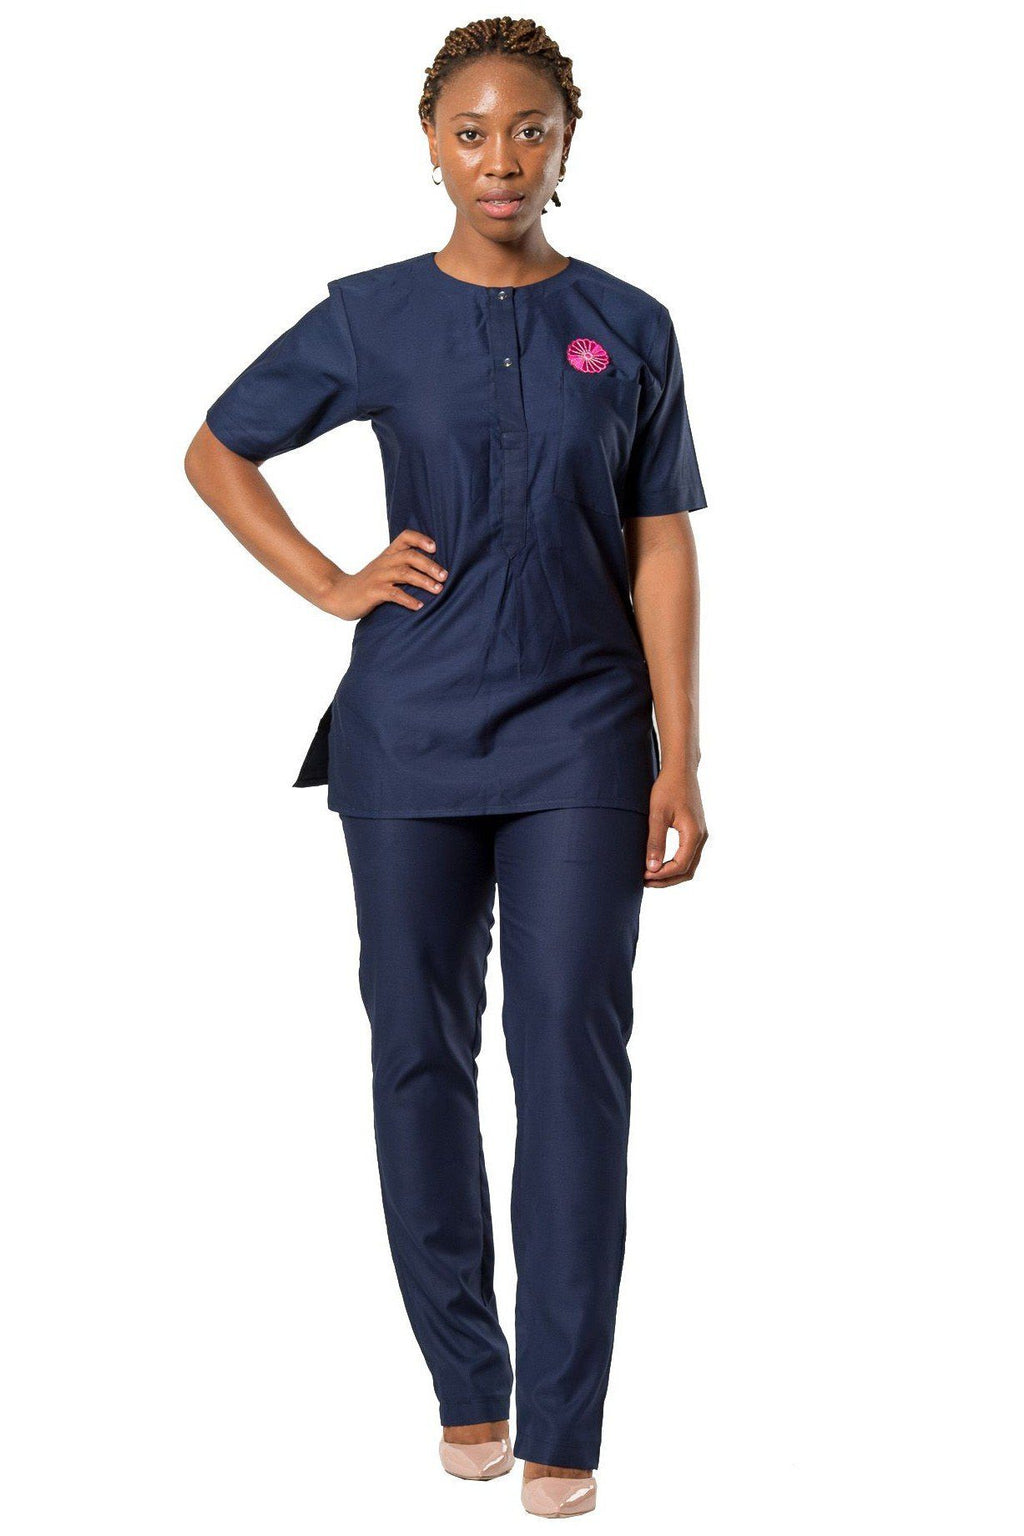 Baba African 2-pieces Women clothing (shirt + pant) | Afrilege